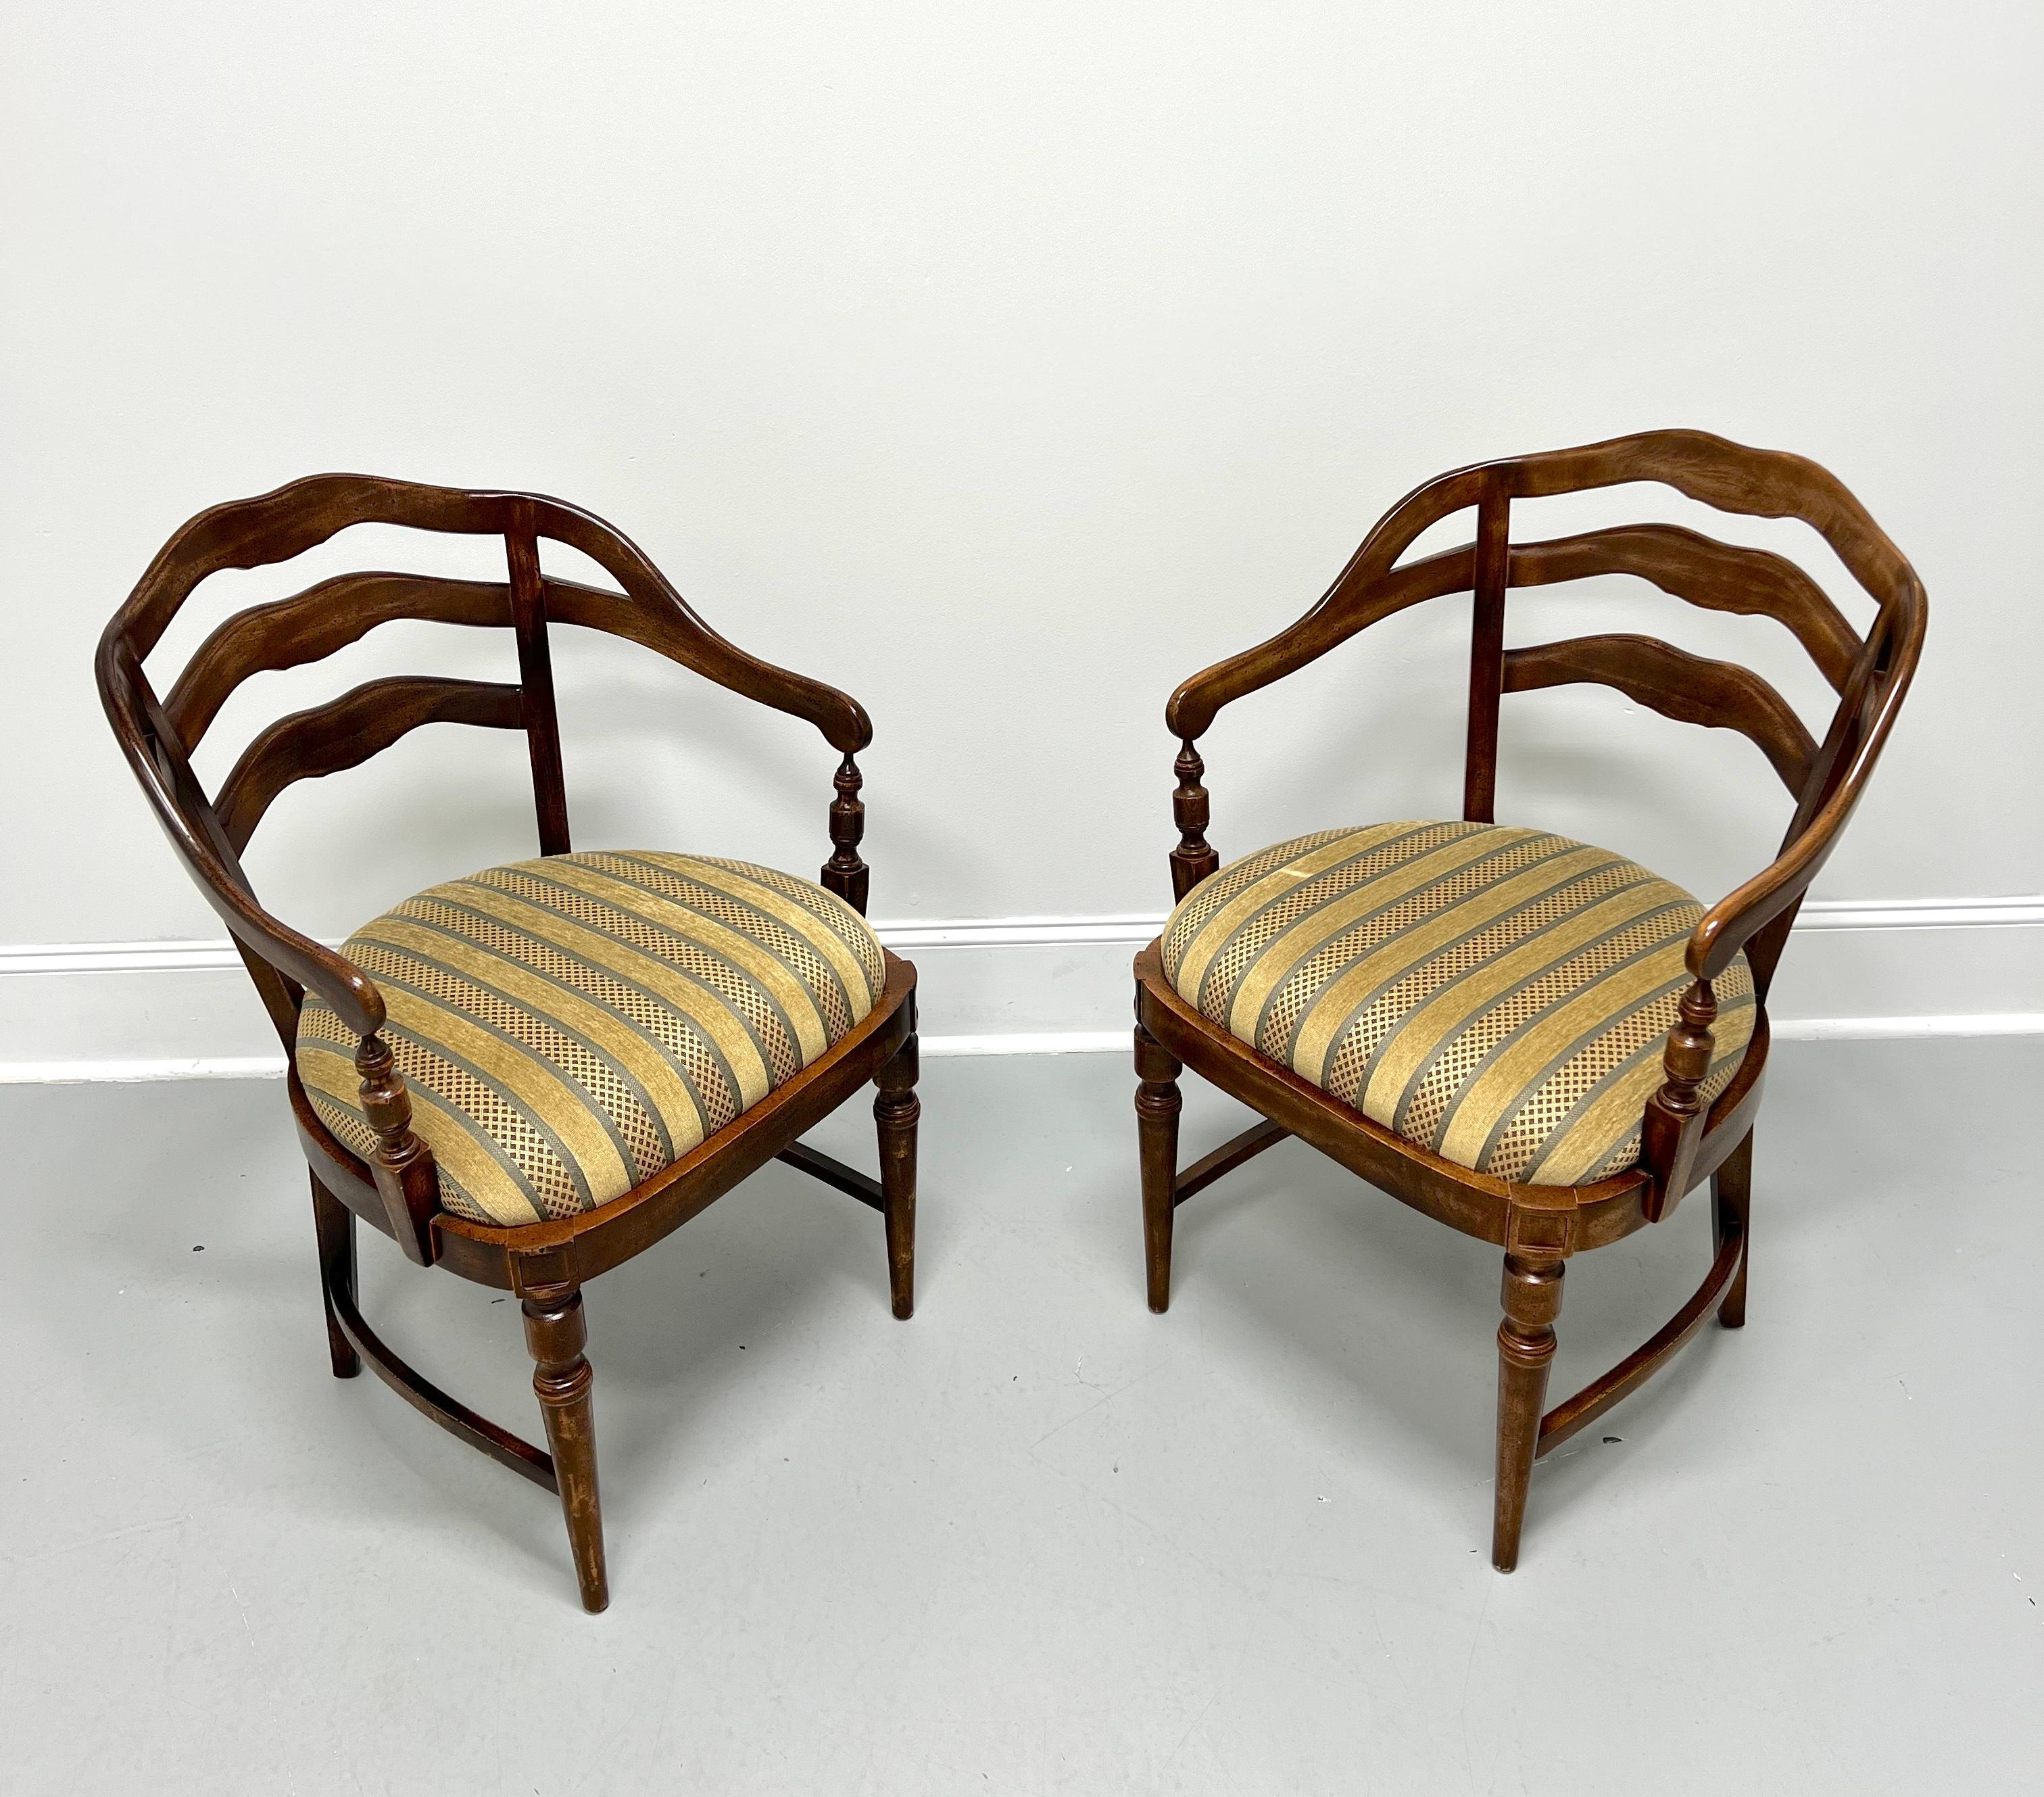 A pair of French Country style barrel chairs, unbranded. Maple with a lightly distressed finish, ladder back design, curved crest rail, curved arms with turned supports, gold tones color stripe fabric upholstered seat, solid apron, side stretchers,